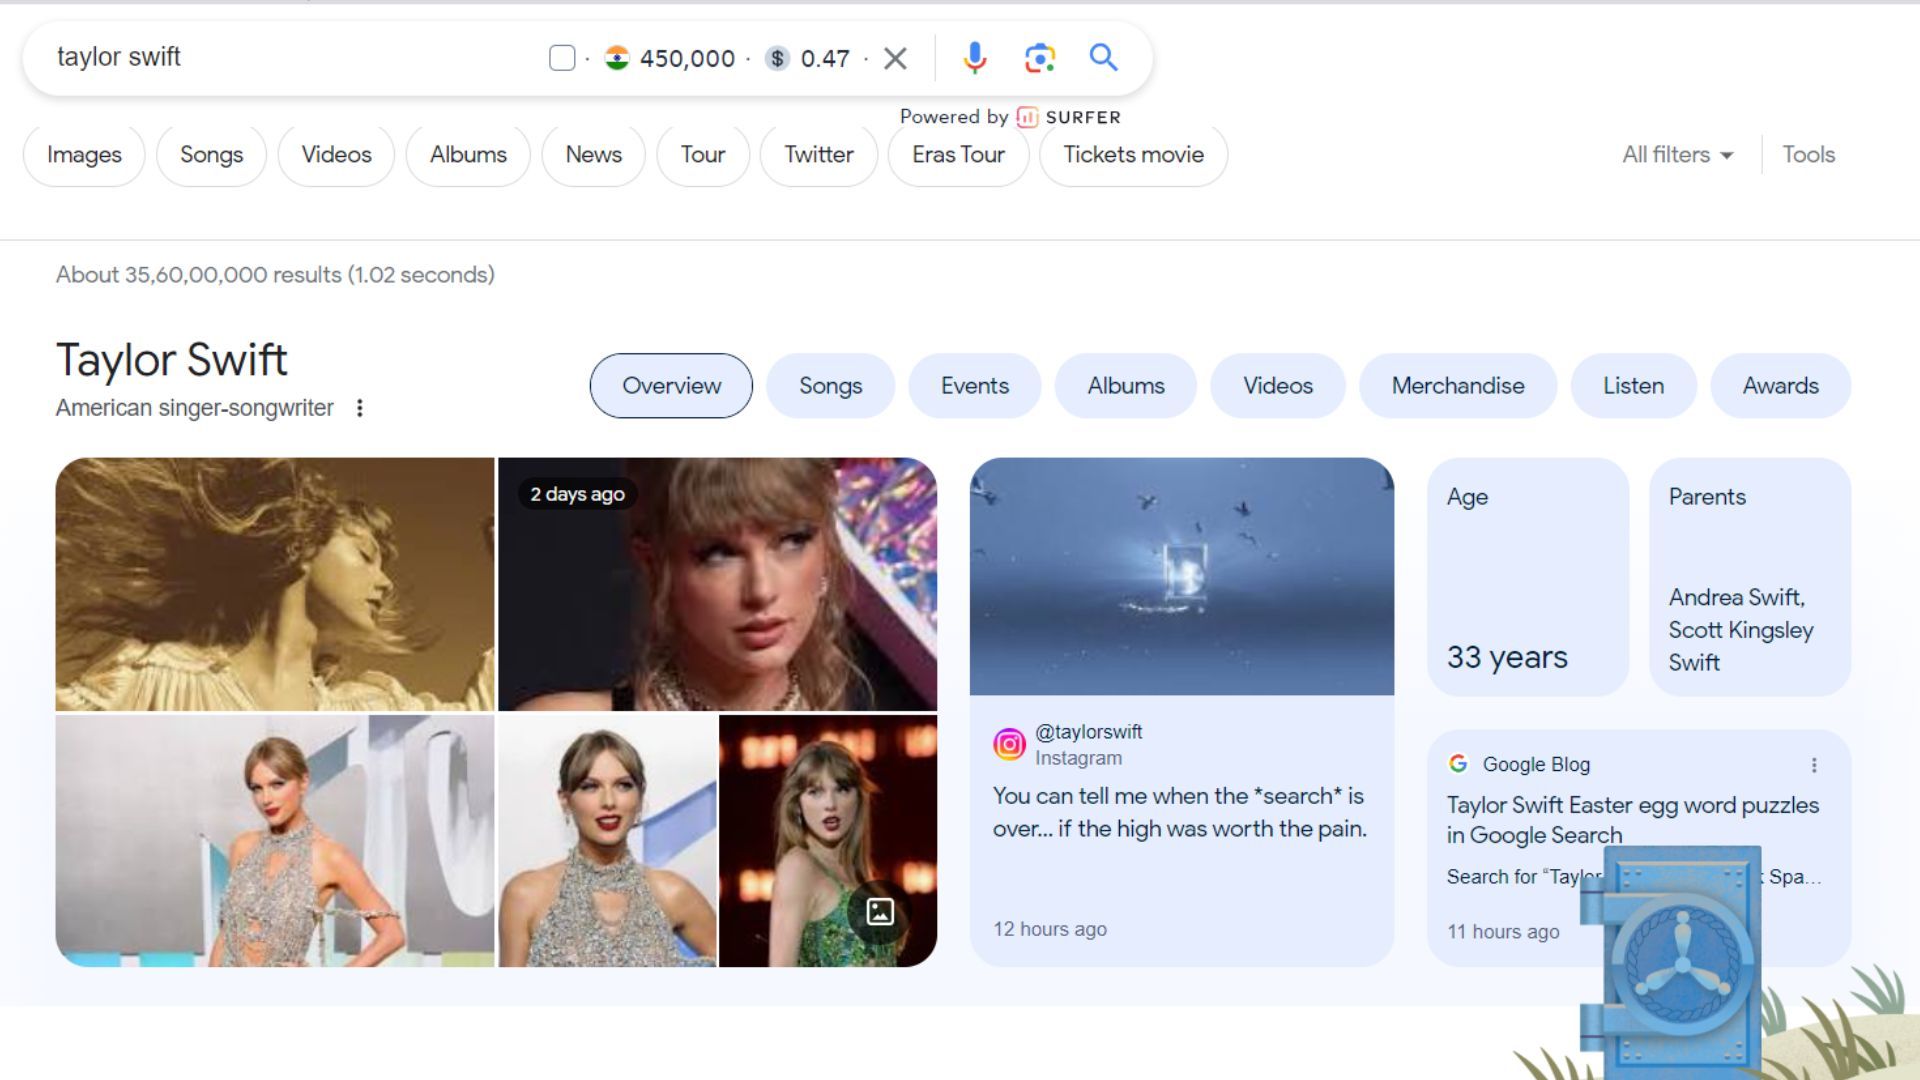 How to play the 1989 (Taylor Swift's Version) song game on Google Search